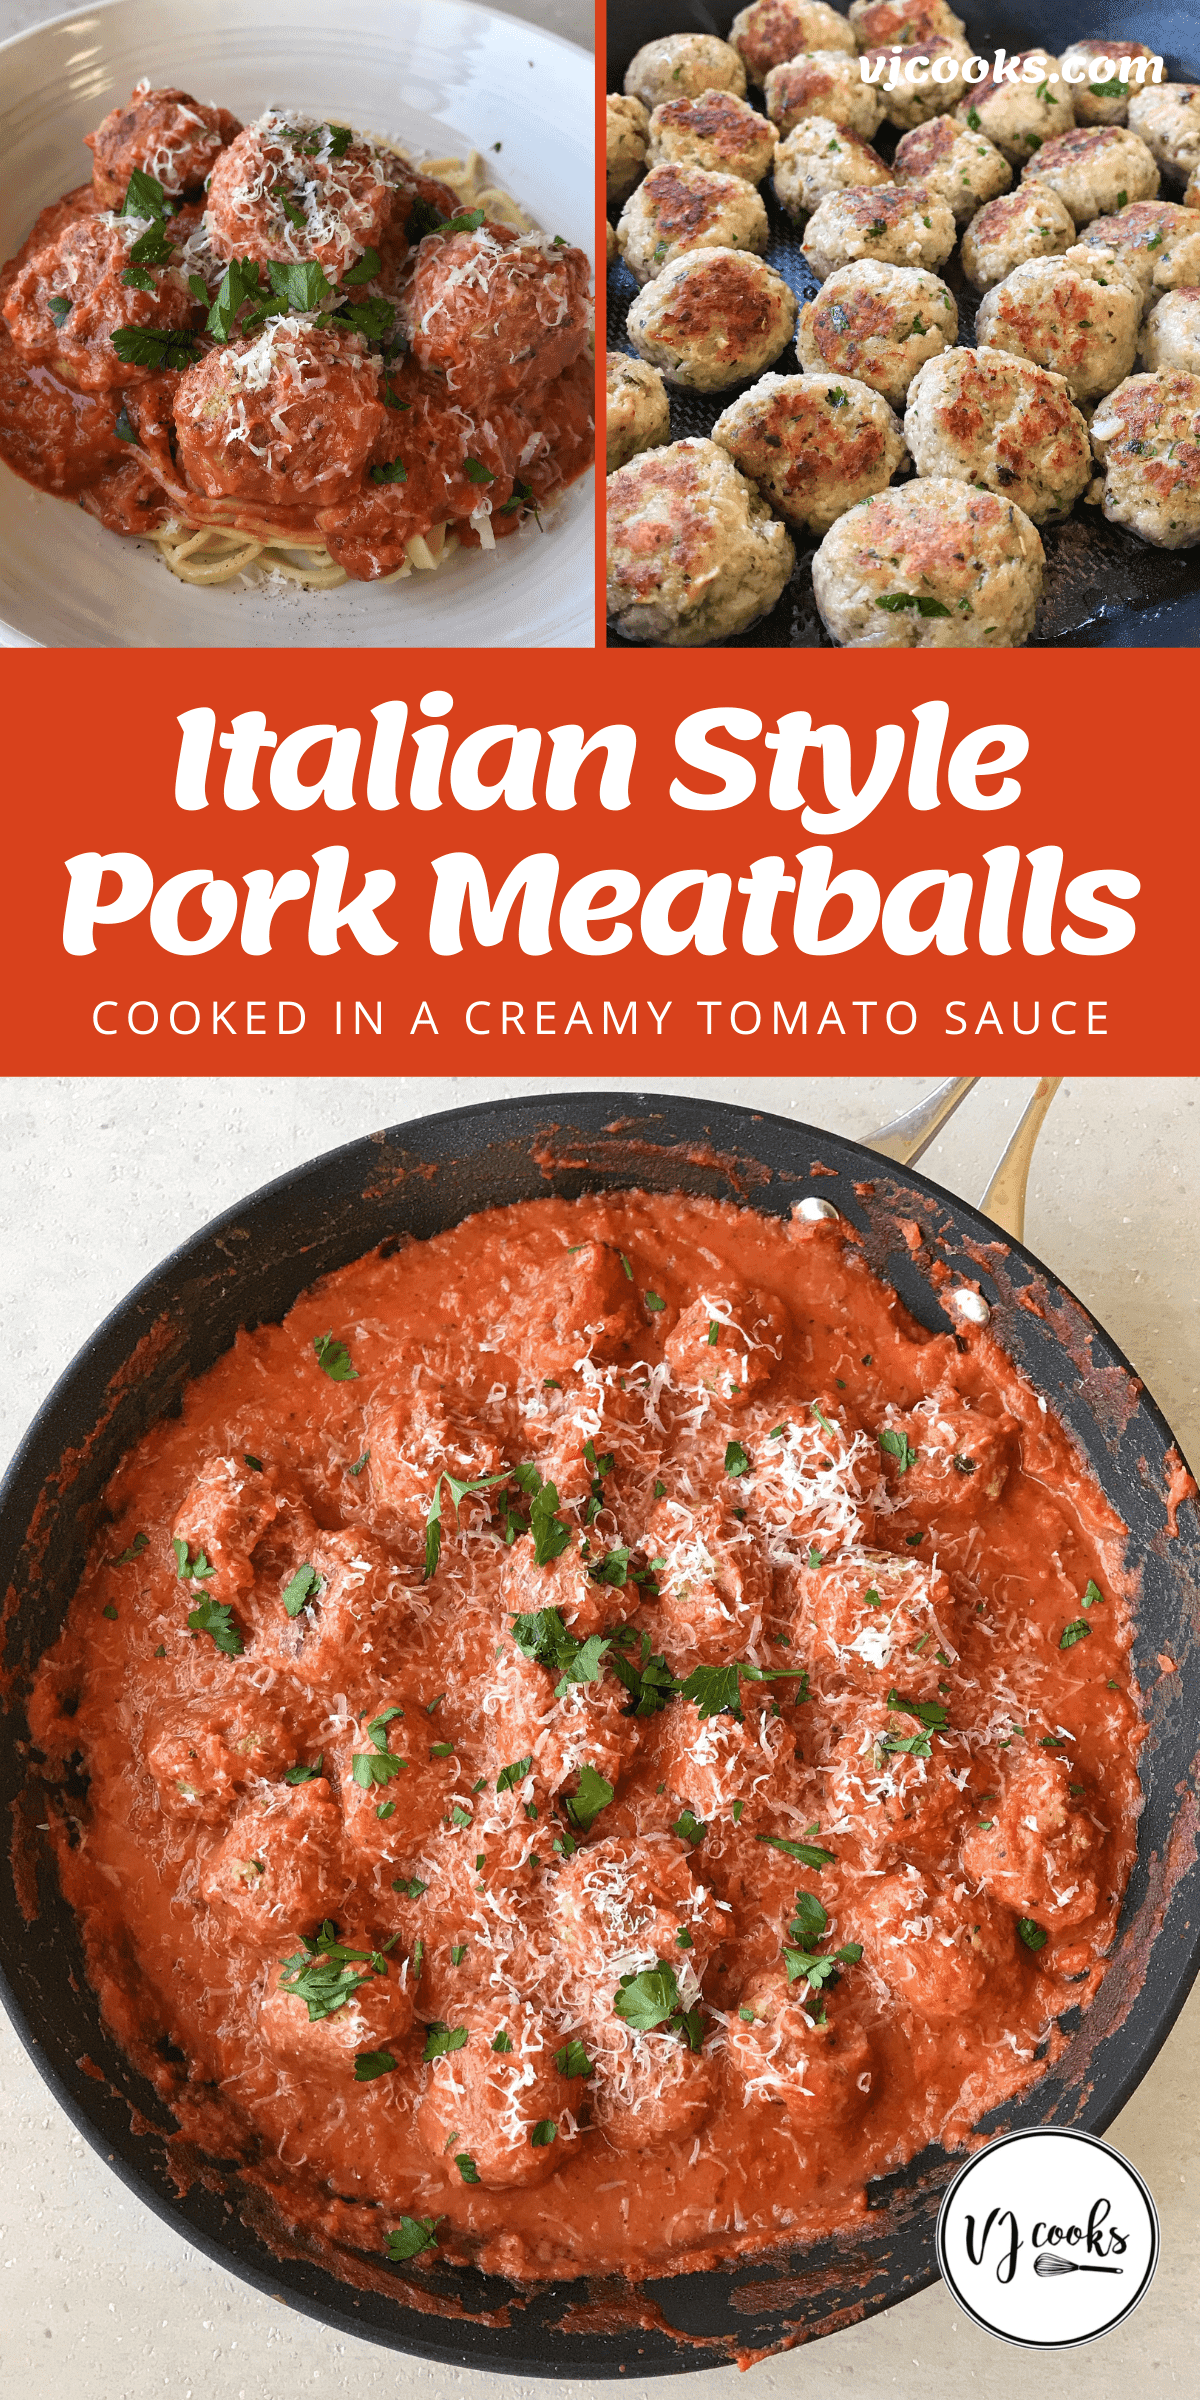 The process of making pork meatballs